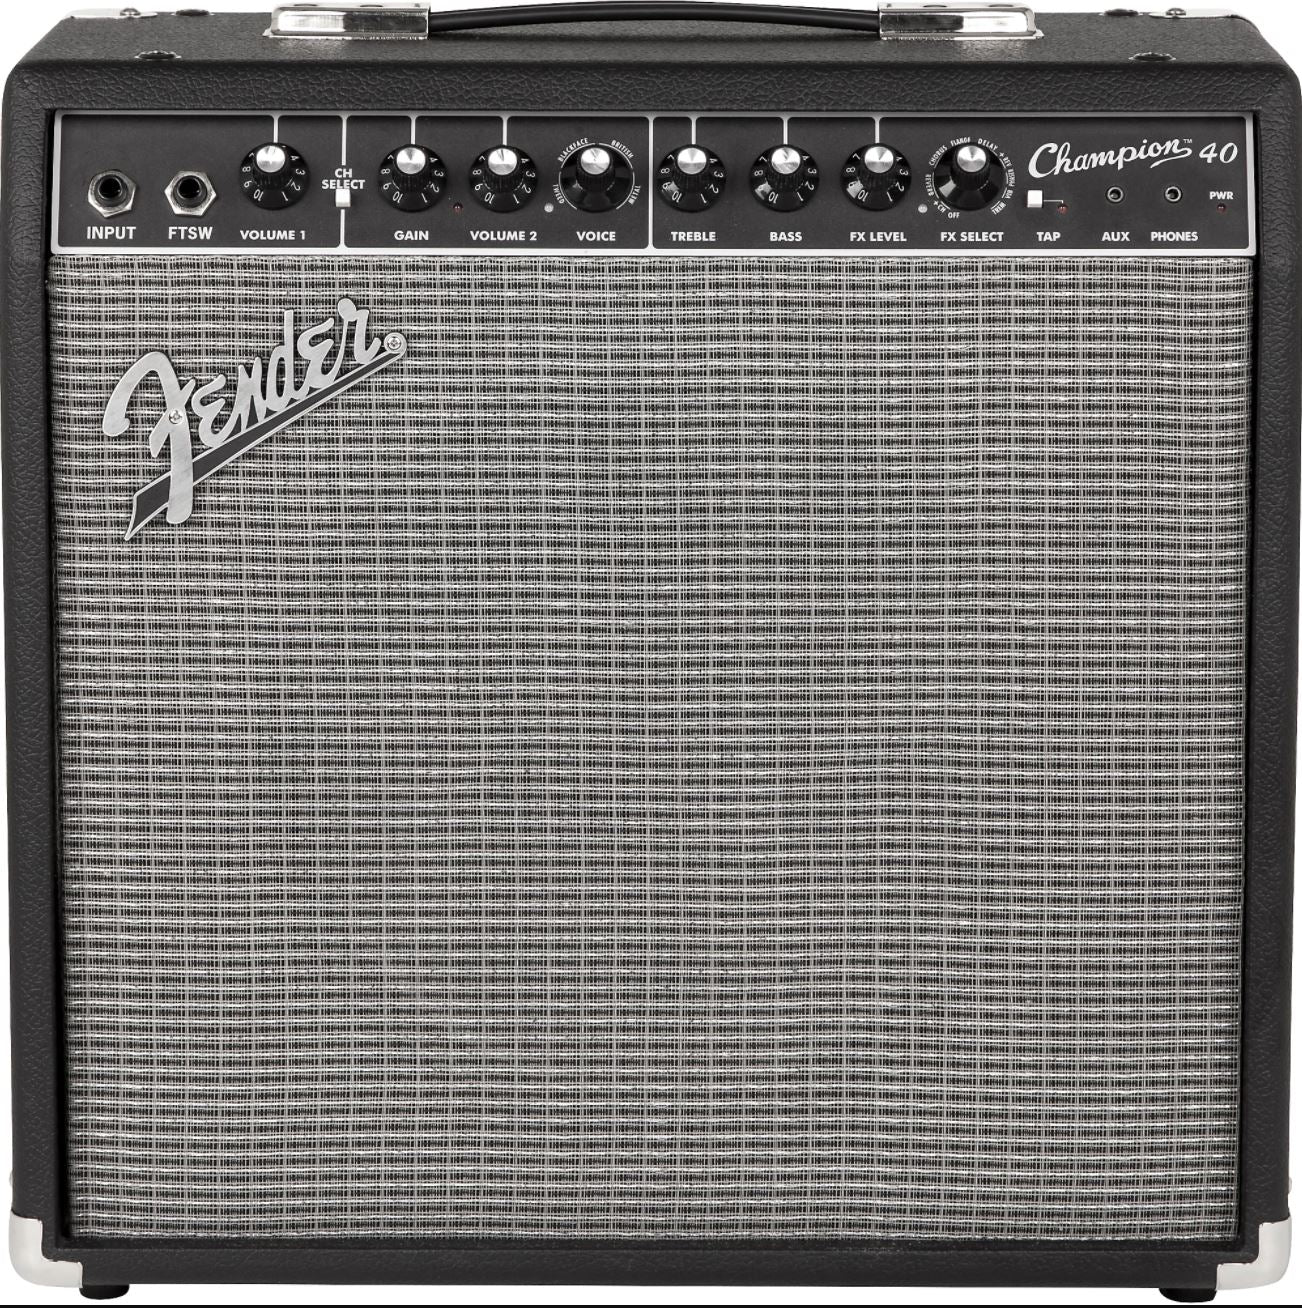 Fender Champion 40 Guitar Combo Amplifier 1x12" 40Watts 2-Channels with 12in Speaker Amp Voicings Effects AUX Input Headphone Output